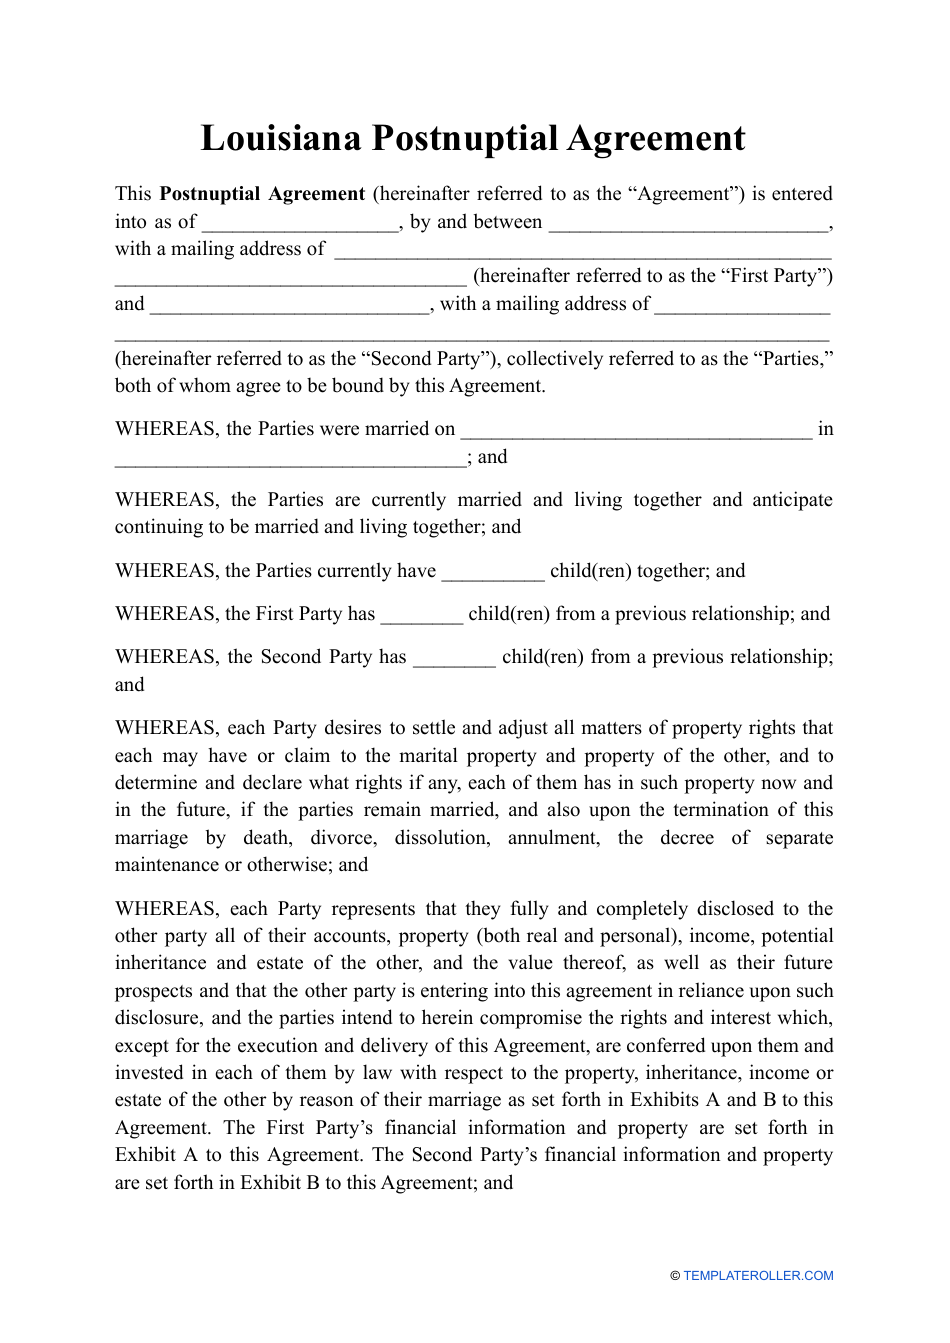 Postnuptial Agreement Template - Louisiana, Page 1